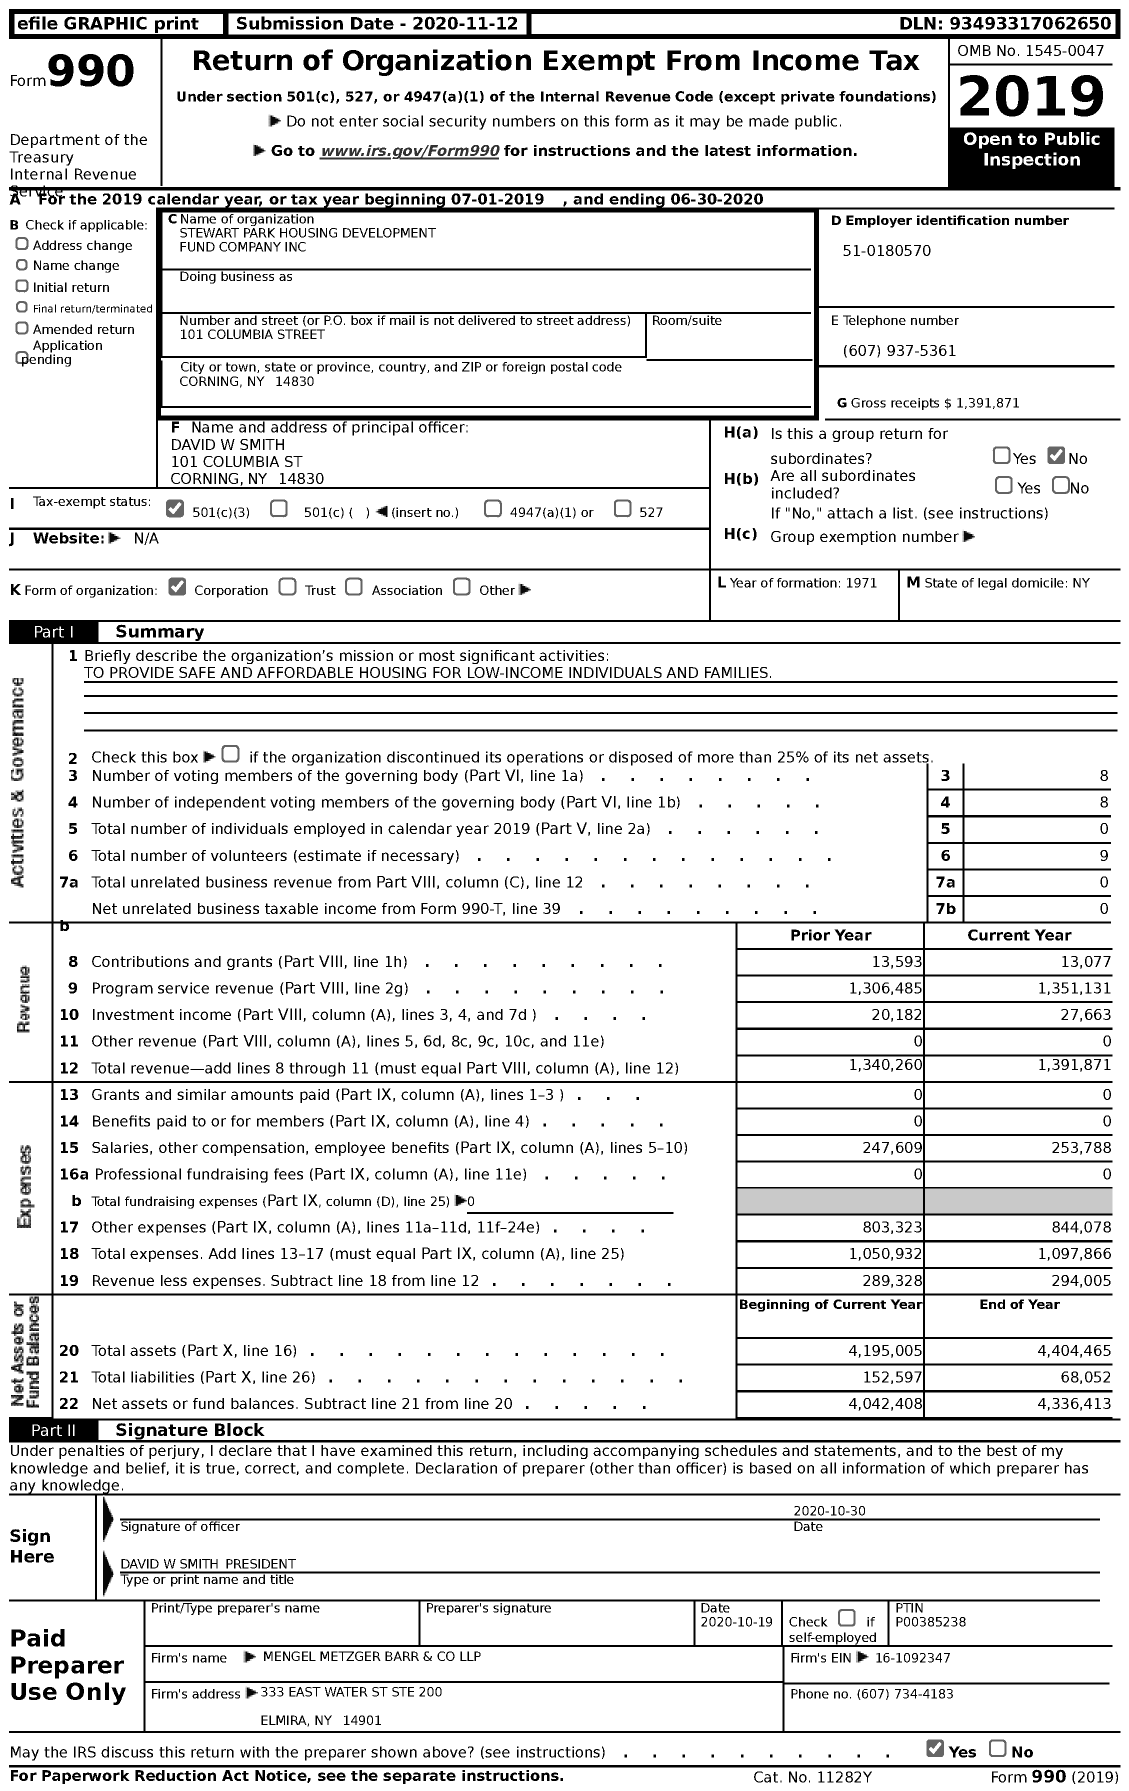 Image of first page of 2019 Form 990 for Stewart Park Housing Development Fund Company